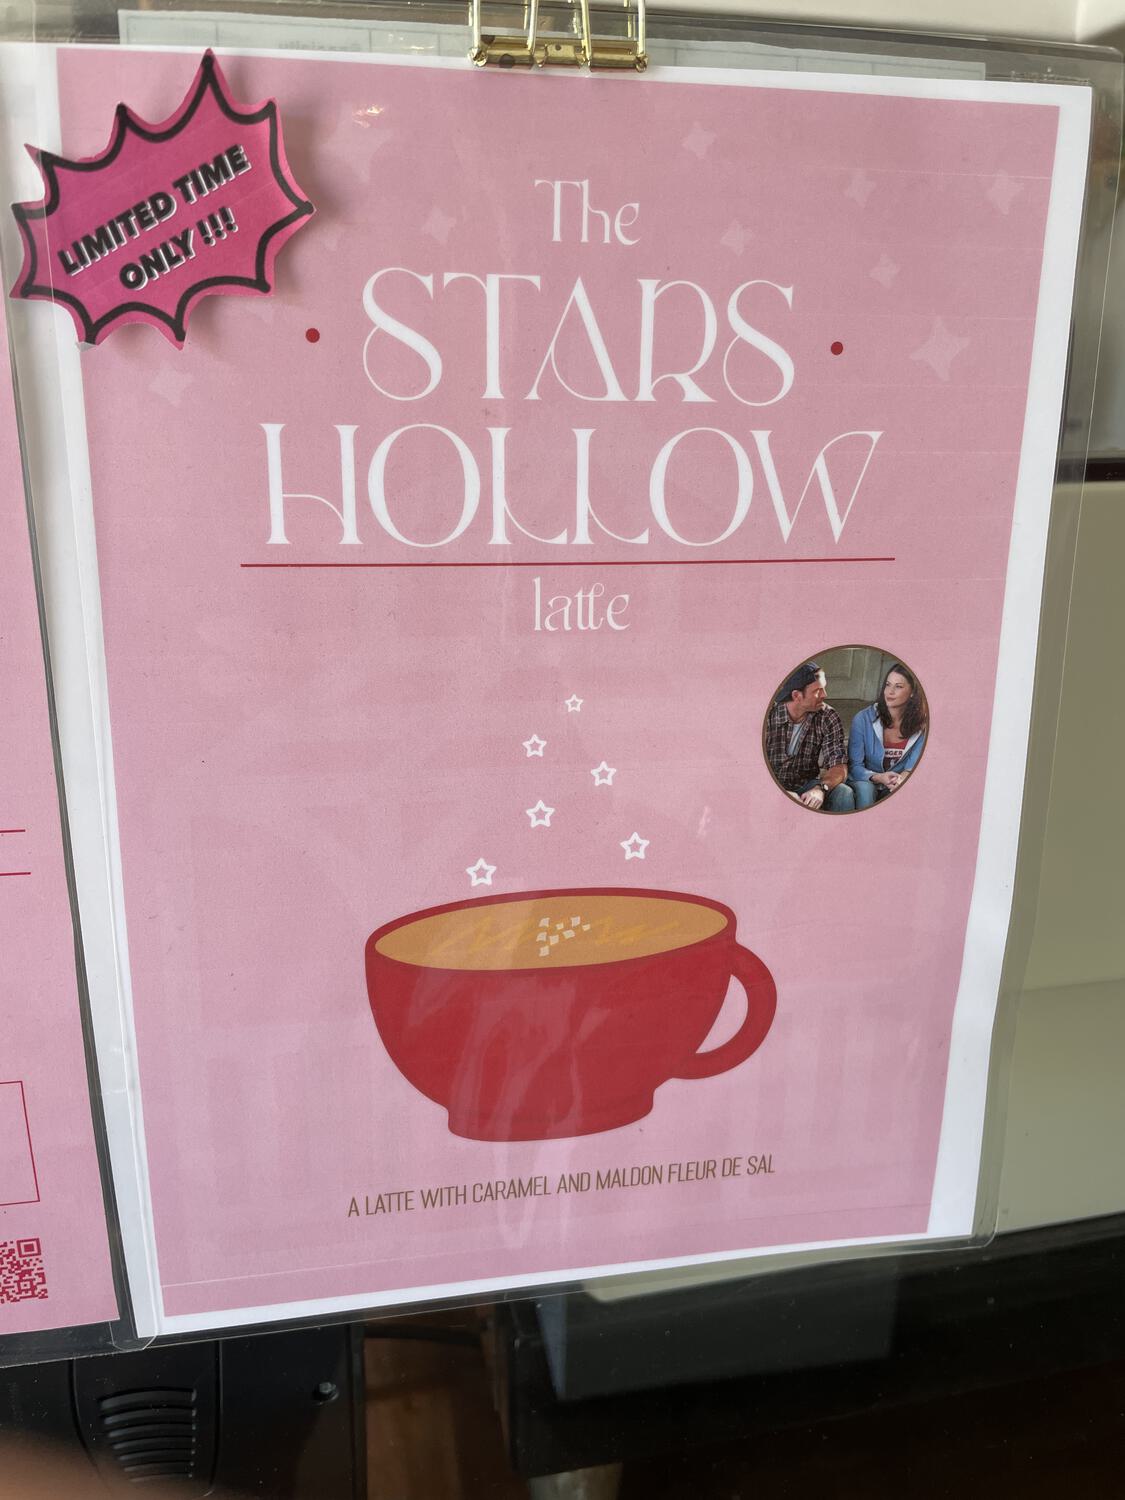 A flyer in a coffee shop advertising "The Stars Hollow latte," complete with a tiny photo from Gilmore Girls